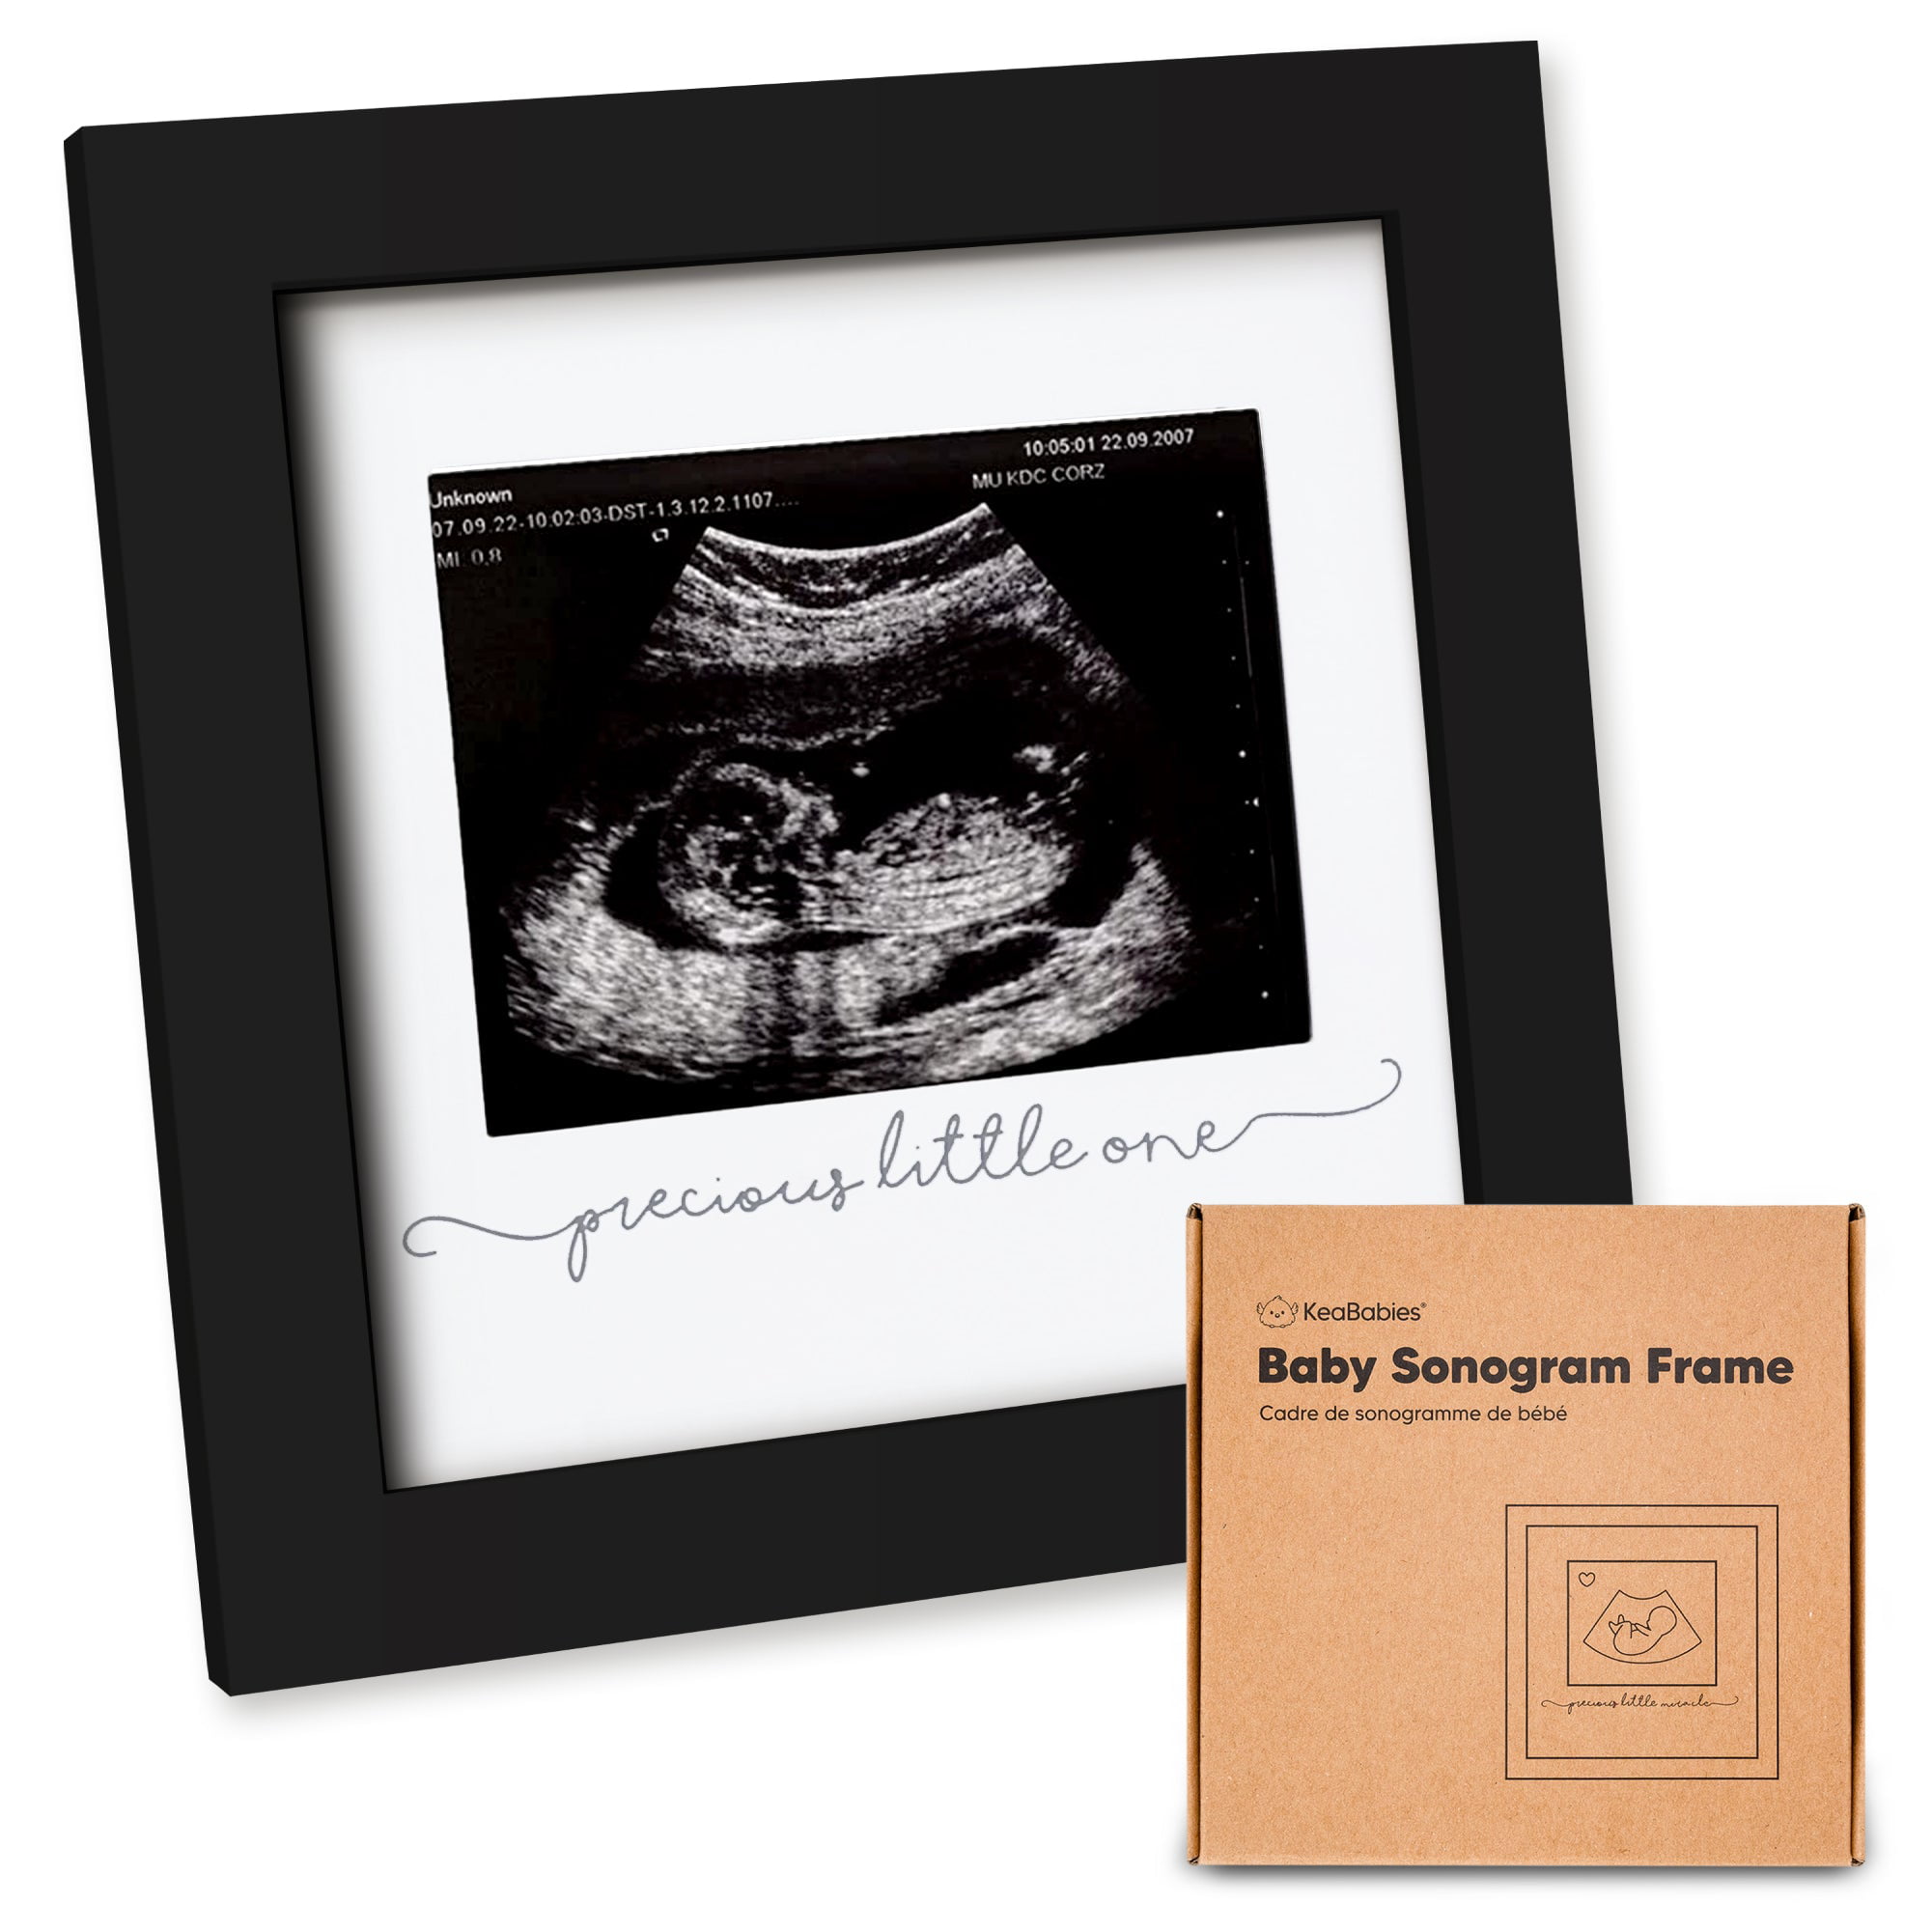 Sonogram Picture Frame Baby Gift Keepsake Baby Ultrasound Frame Nursery Décor Gift for Expecting Parents We Love You From Your First Heartbeat 